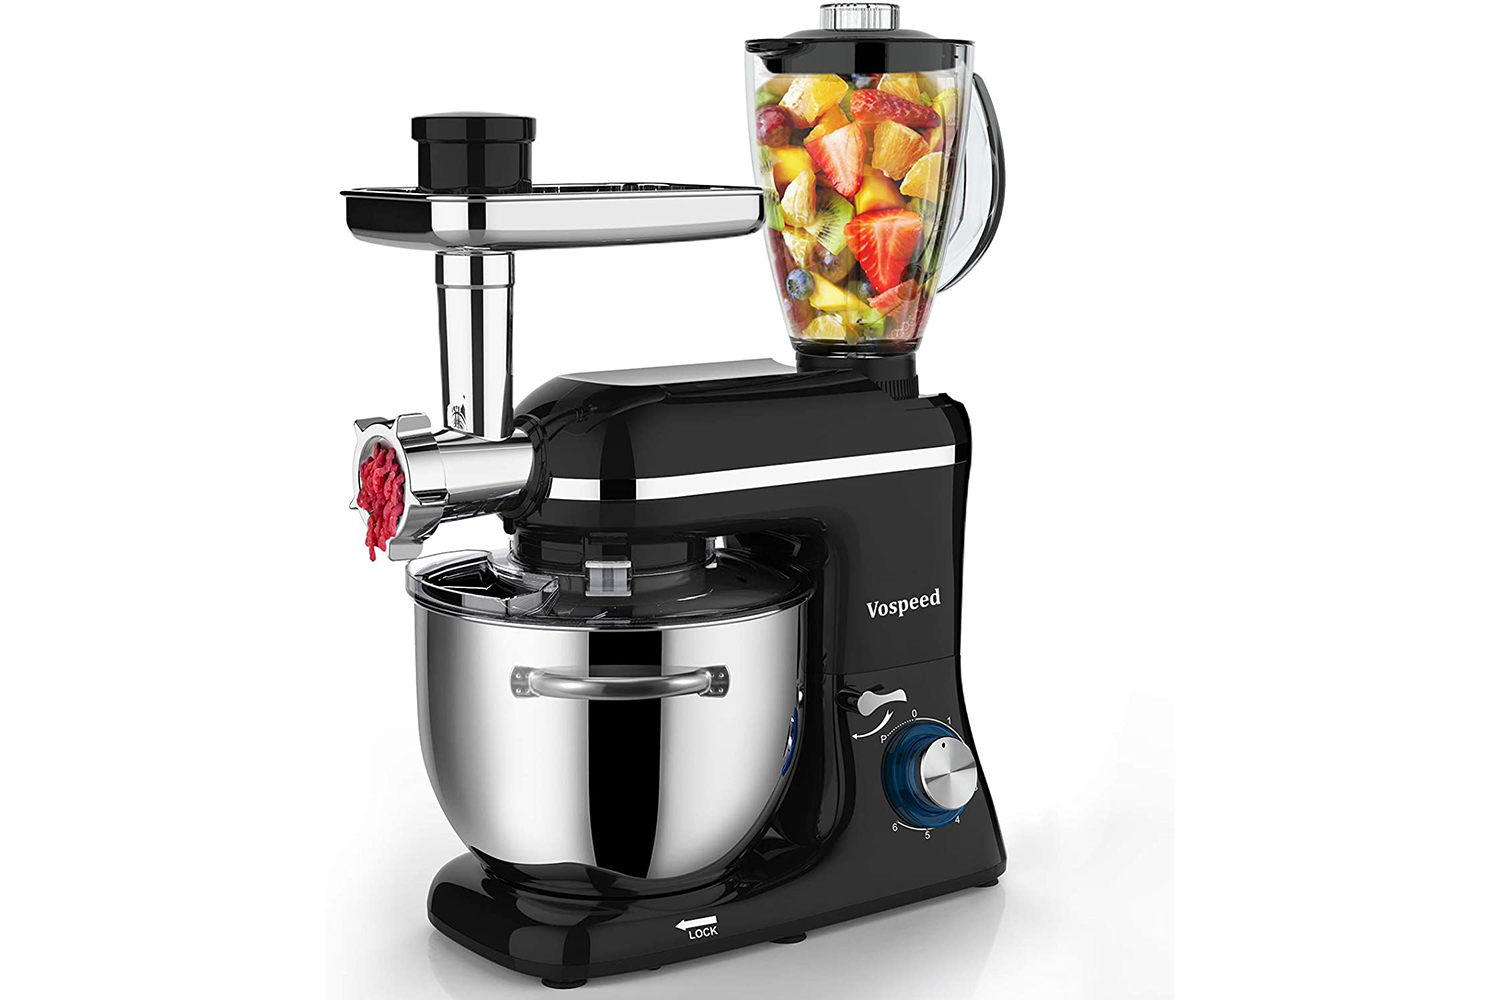 https://www.themanual.com/wp-content/uploads/sites/9/2021/06/vospeed-stand-electric-multifunctional-mixer.jpg?fit=1500%2C1000&p=1